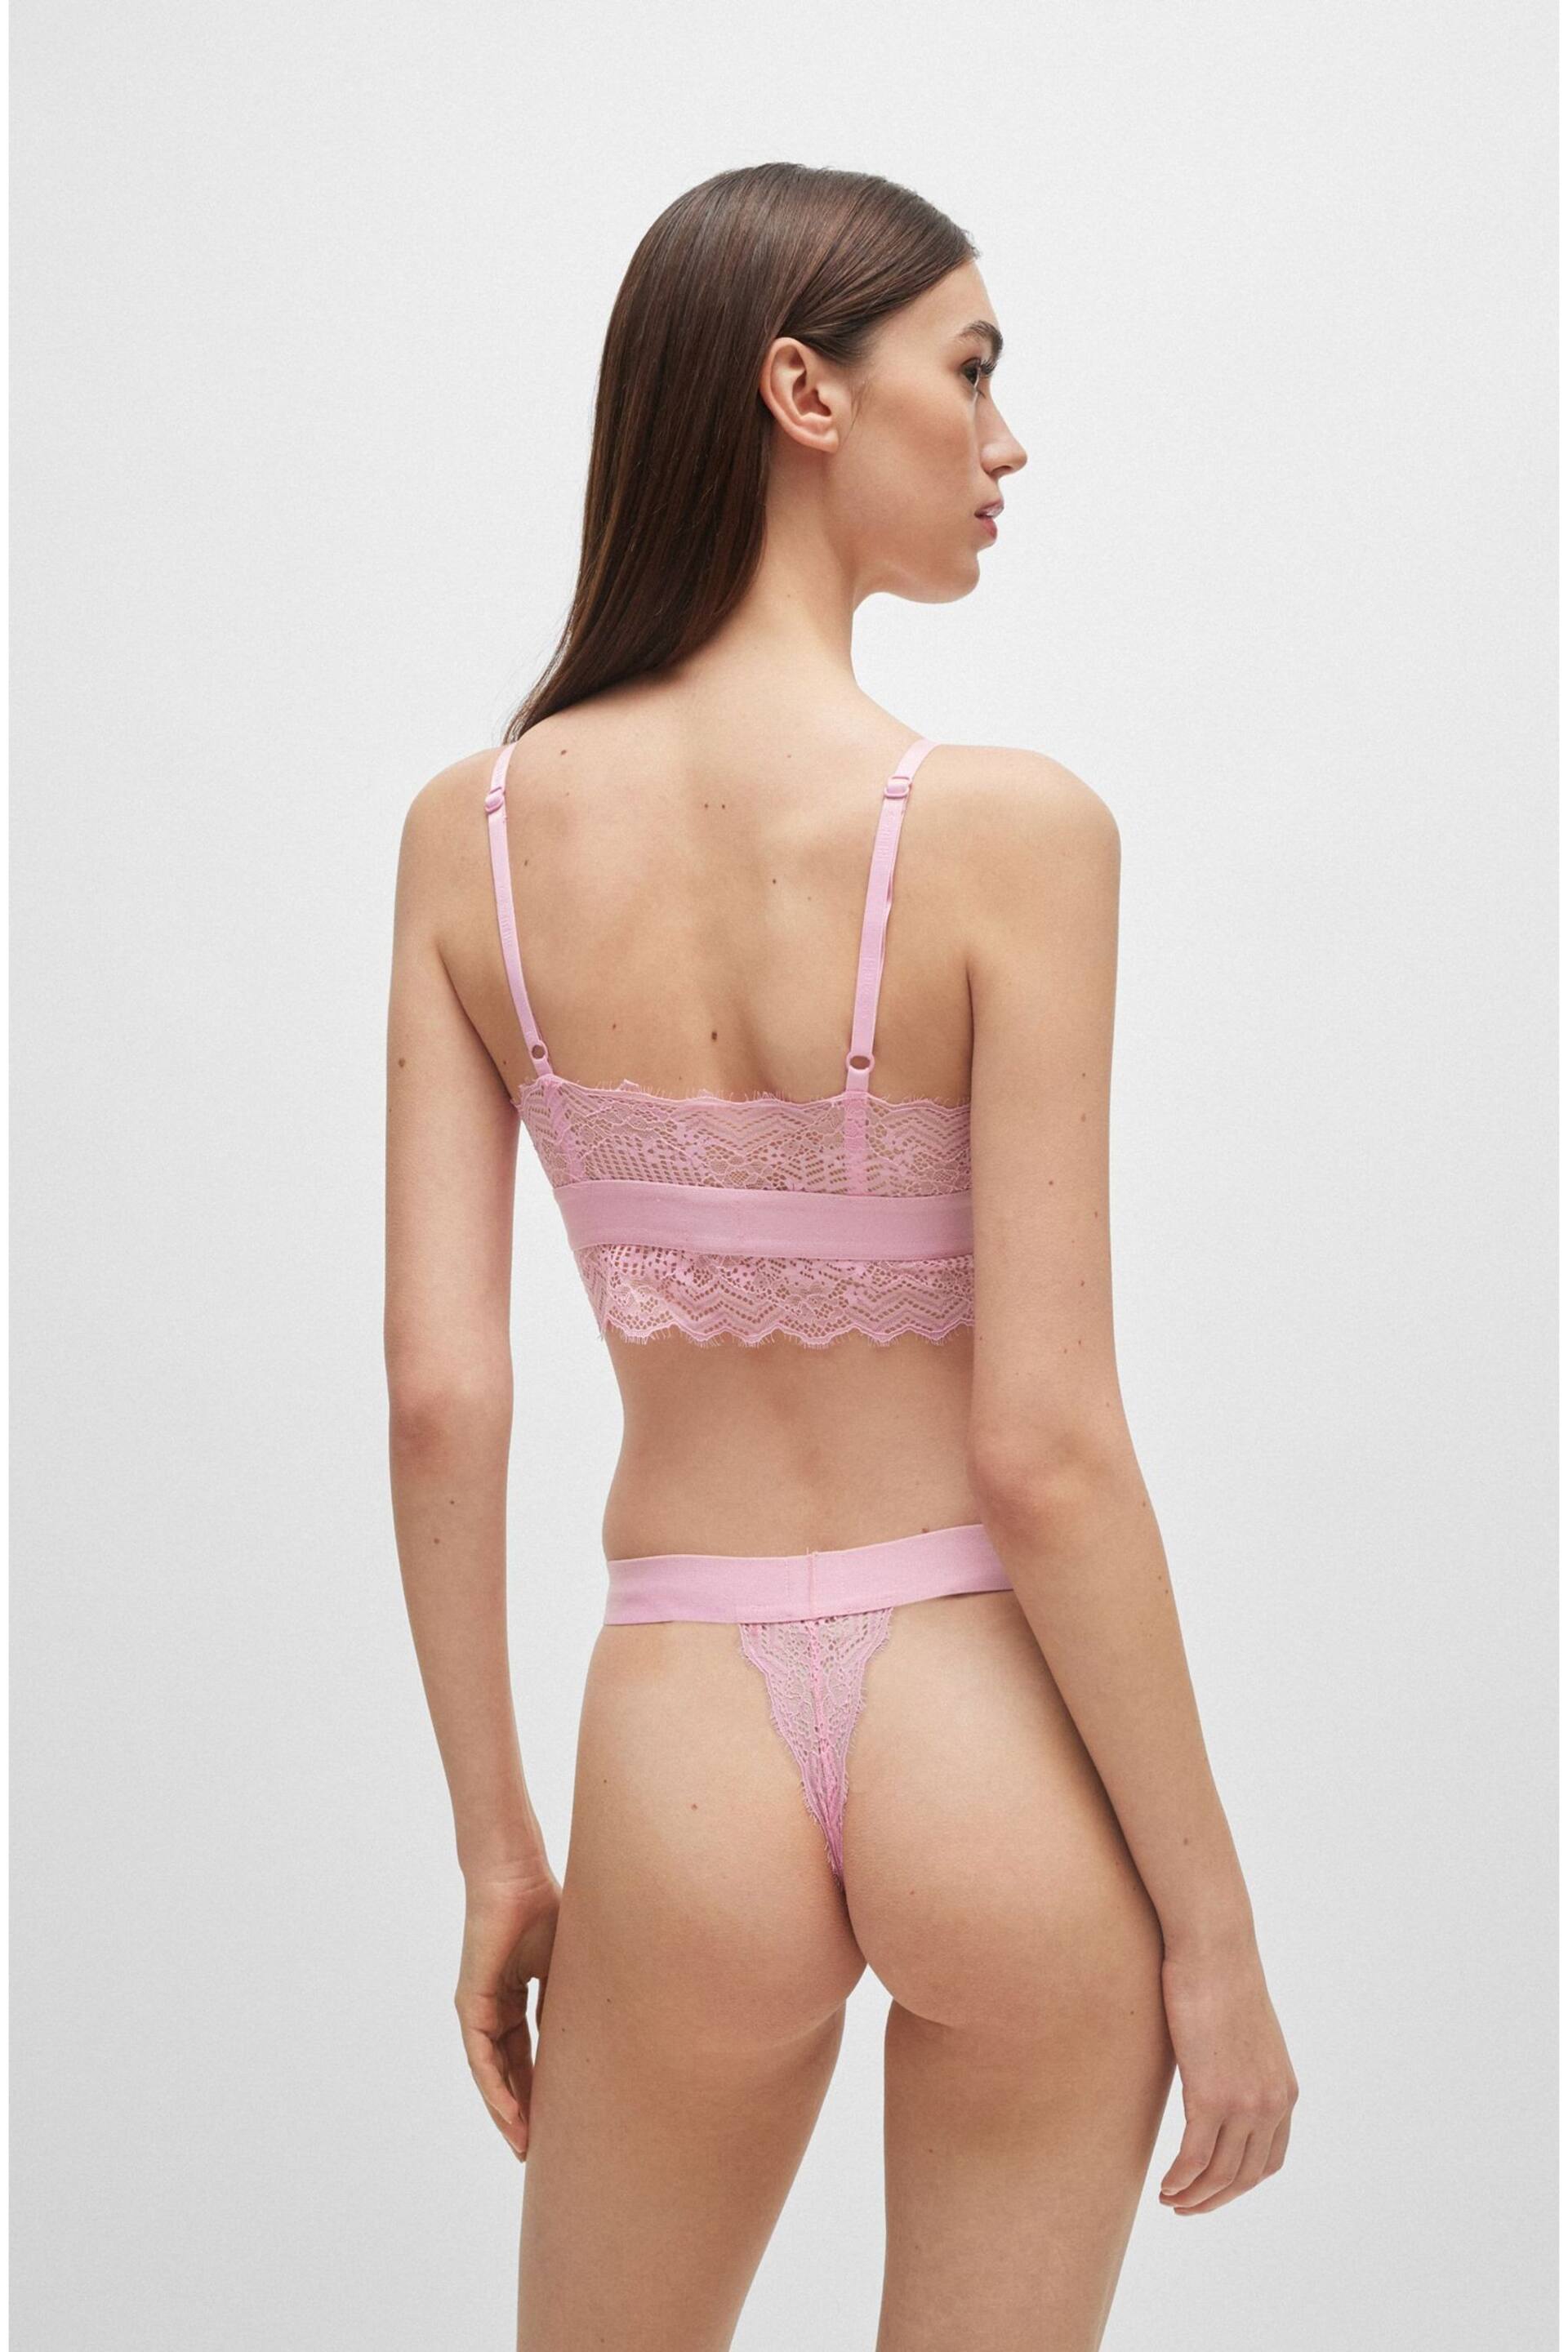 HUGO Pink Padded Triangle Bra in Geometric Lace With Logo Label - Image 4 of 5